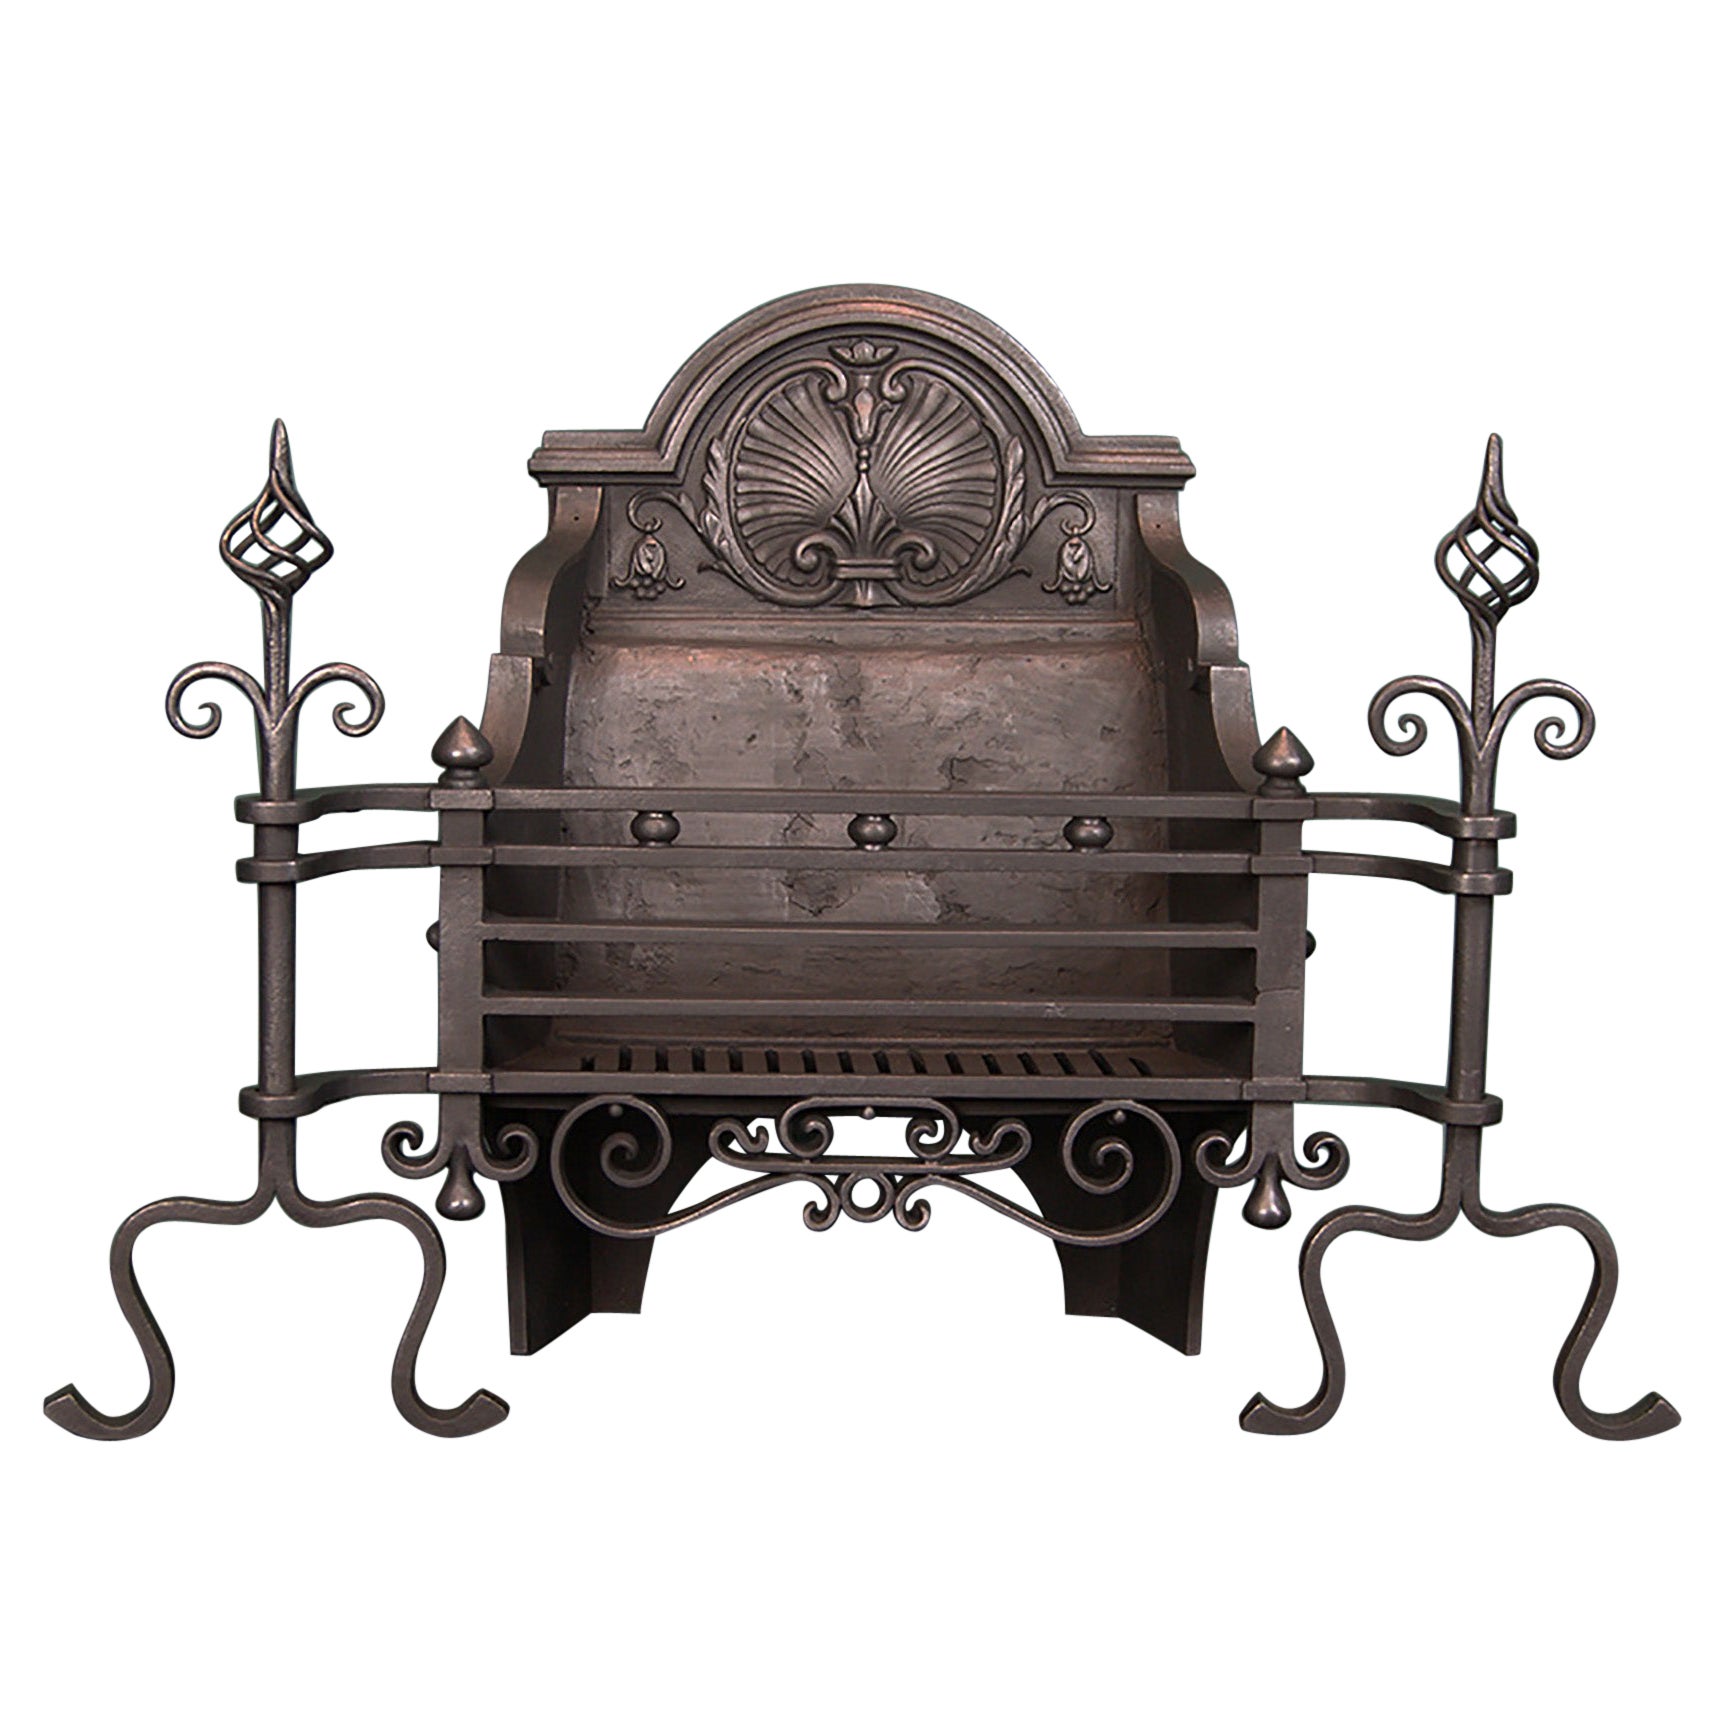 An Arts & Crafts Black Wrought Fire Grate with Shell Decoration